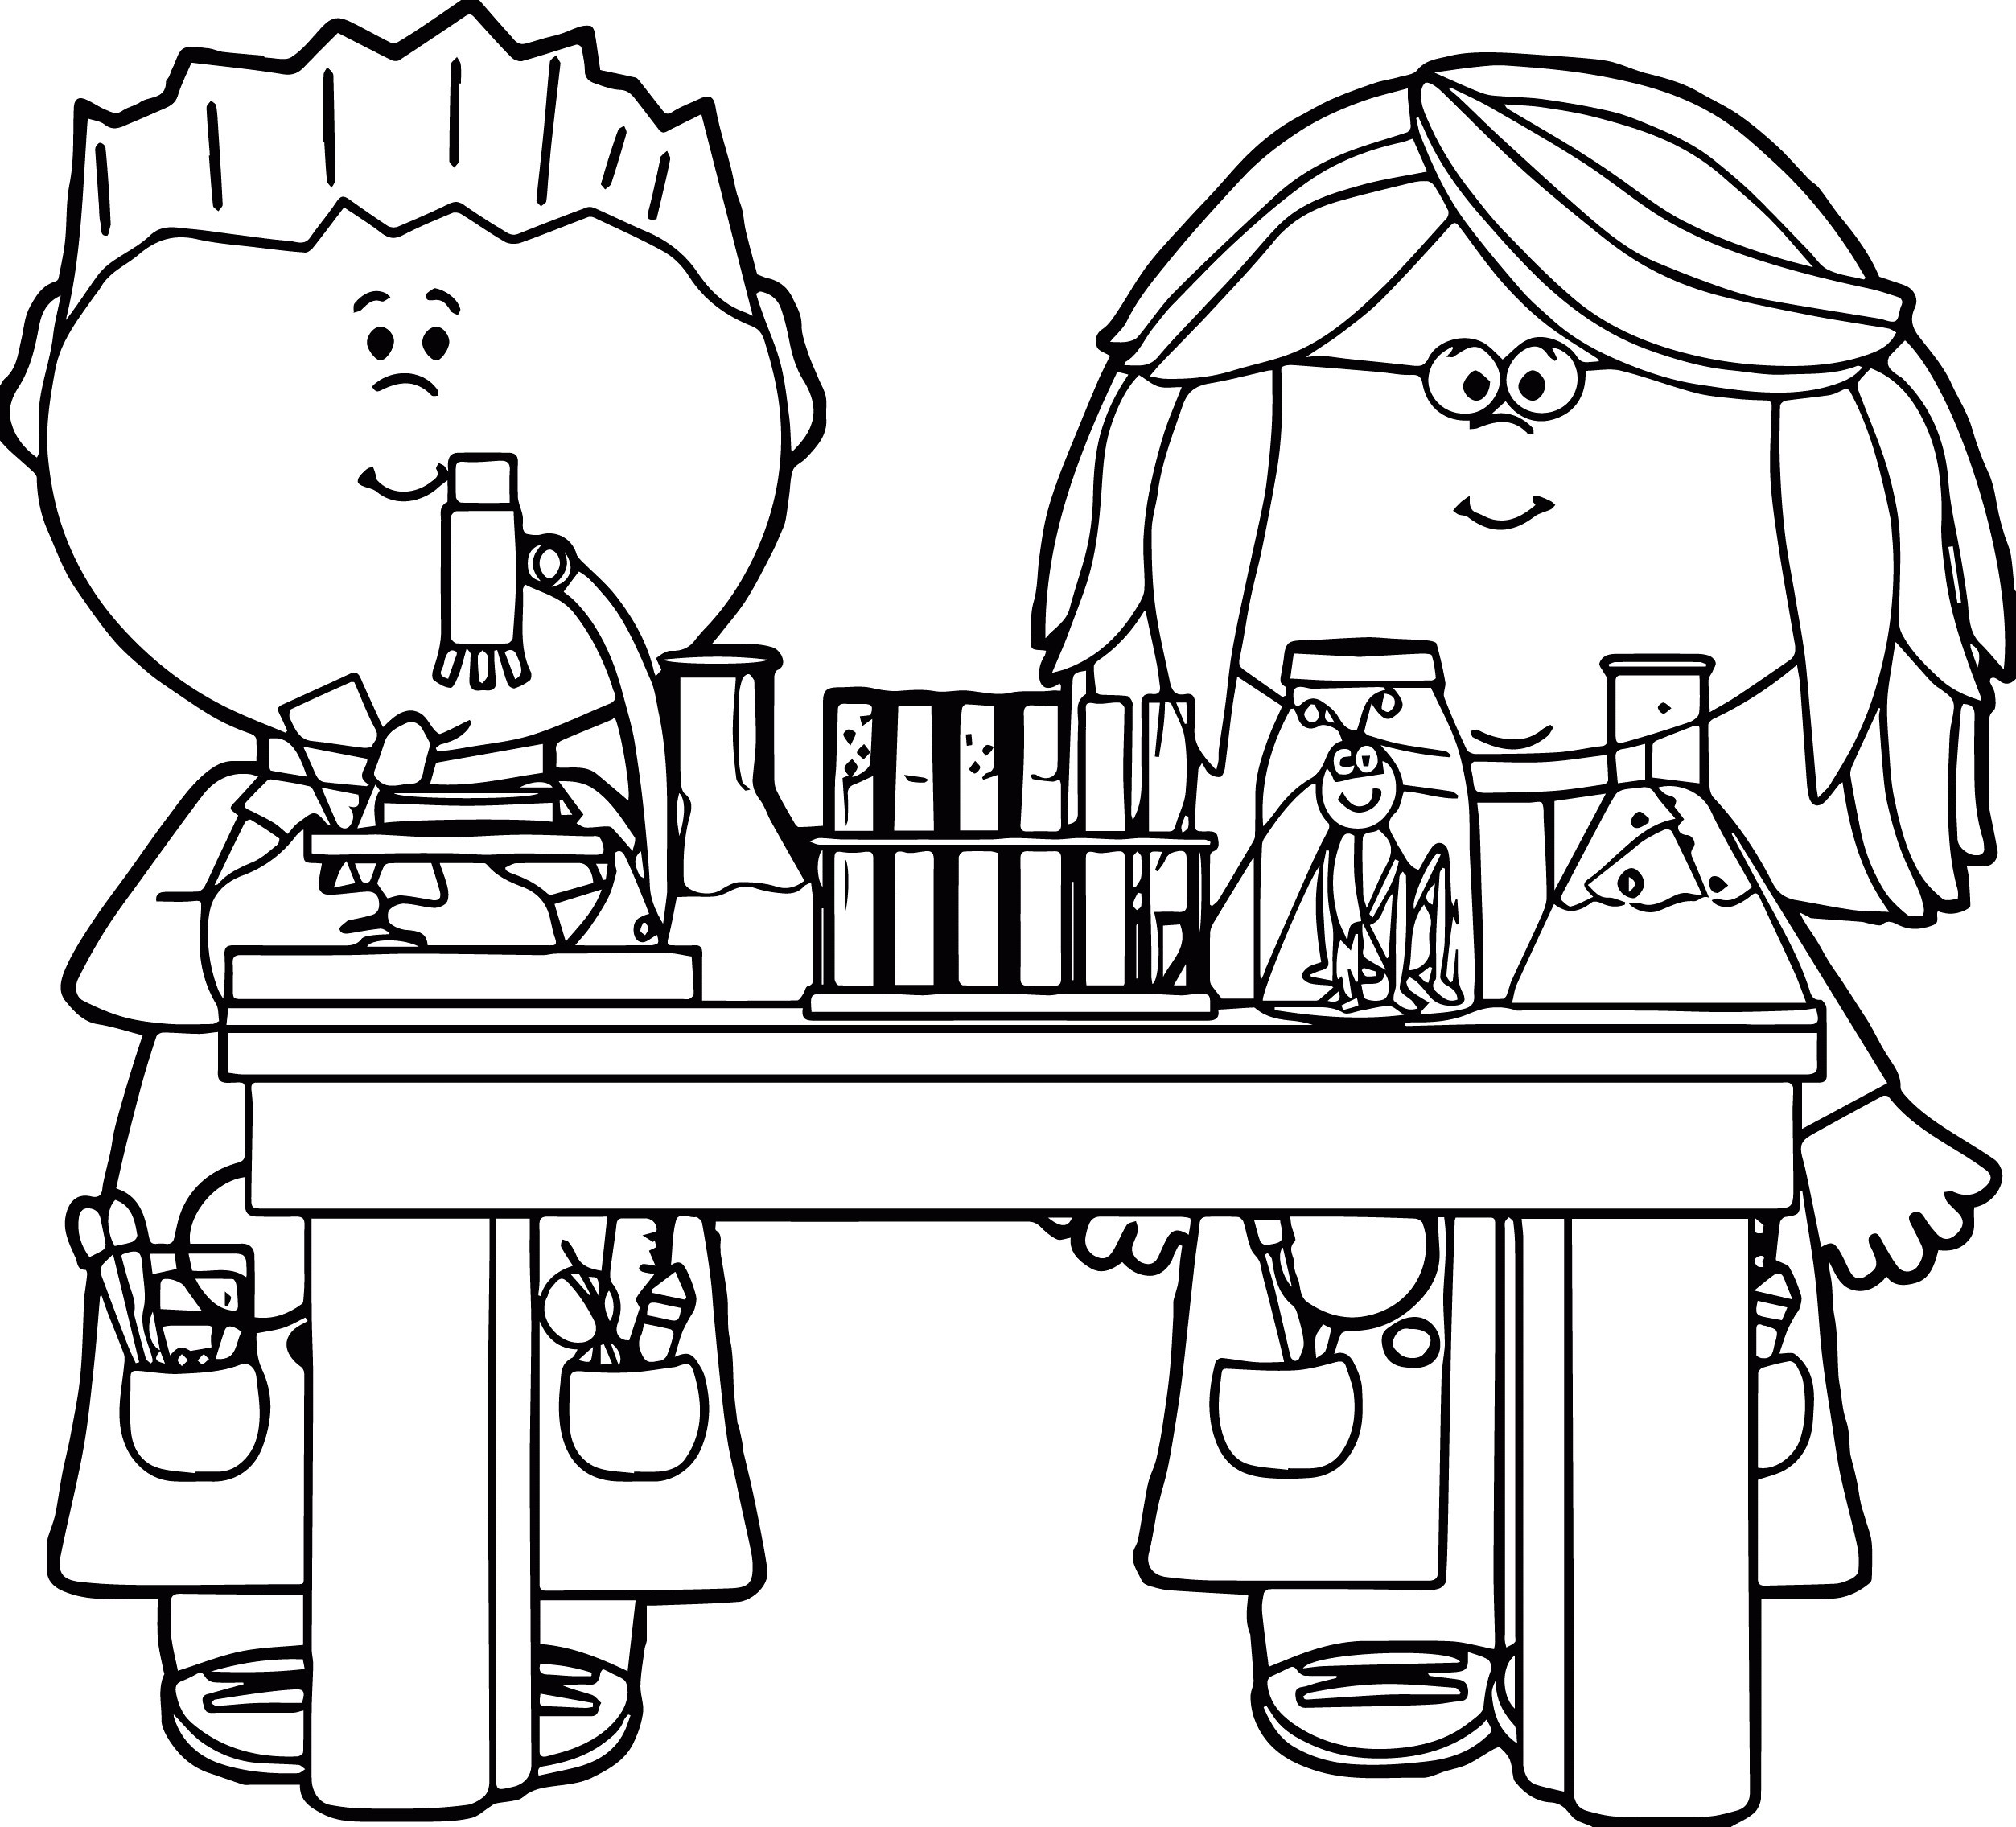  Coloring Pages For Science 7